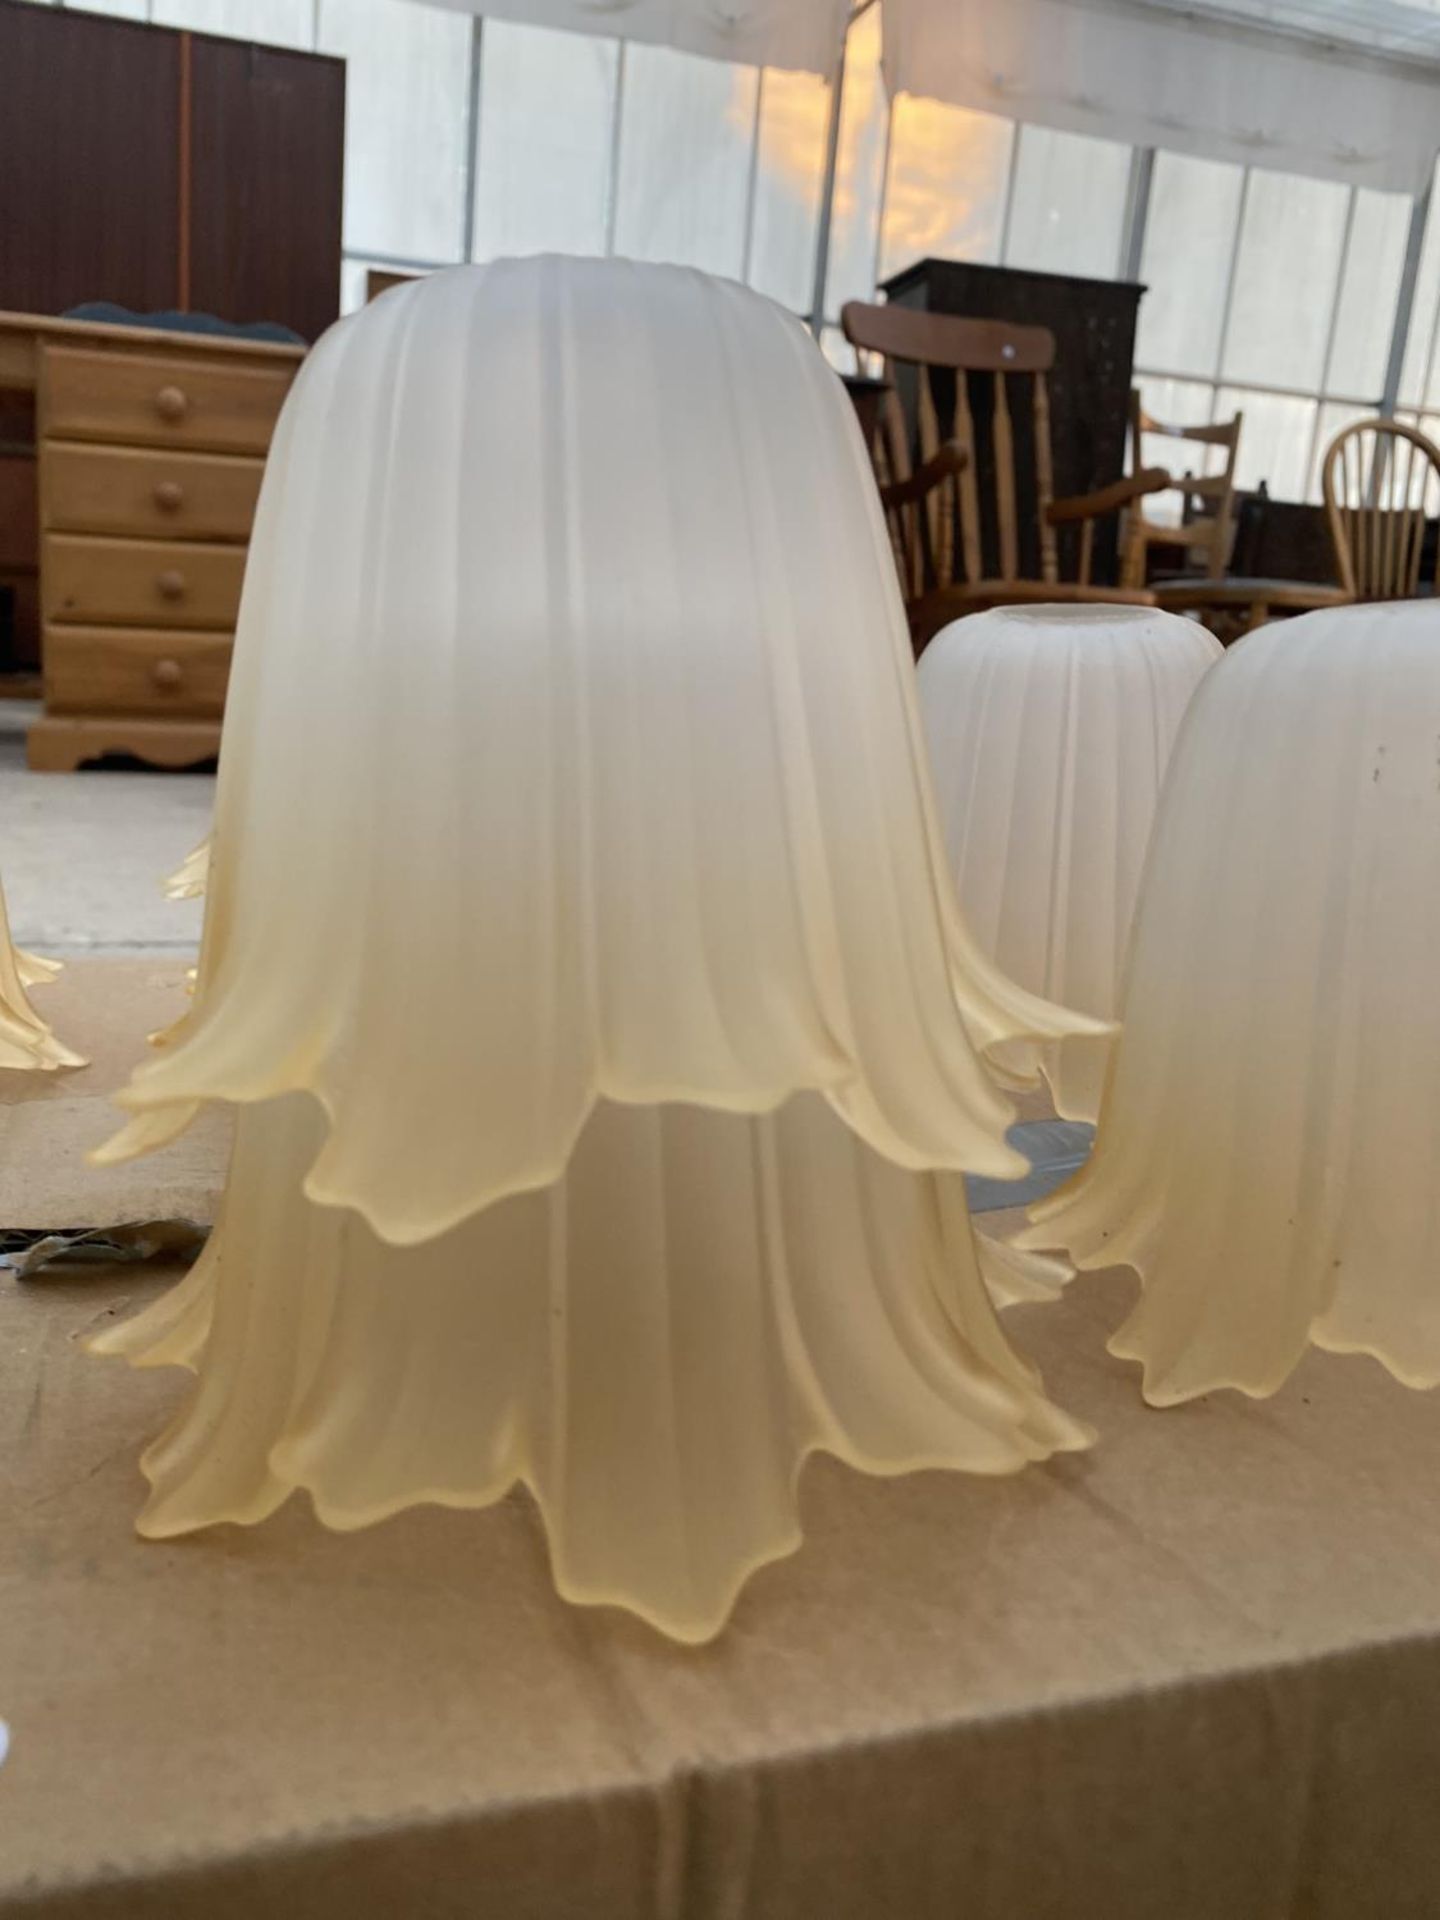 A COLLECTION OF GLASS LIGHT SHADES - Image 3 of 3